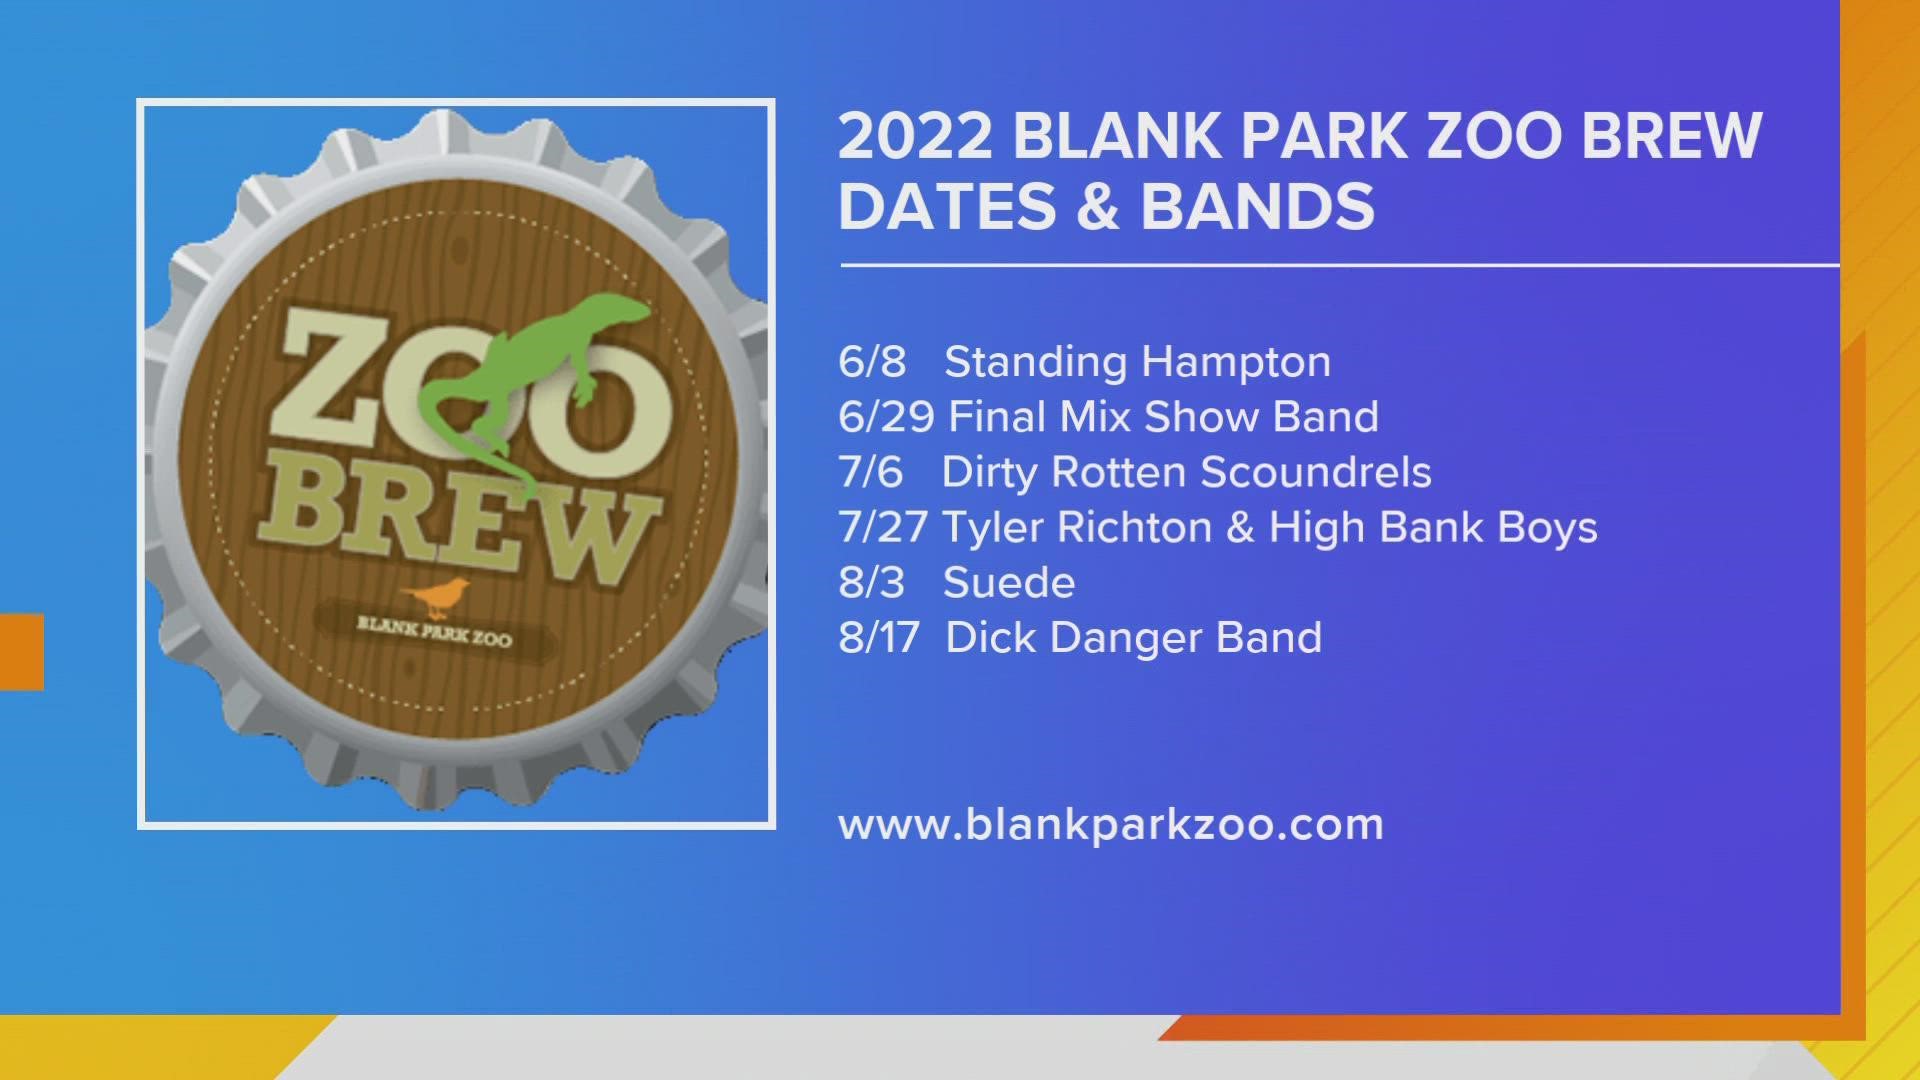 Standing Hampton ROCKS the first Blank Park Zoo Brew of 2022 TONIGHT, June 8th!  Adults can enjoy live music, libation & visit animals from 5:30-9pm | Paid Content